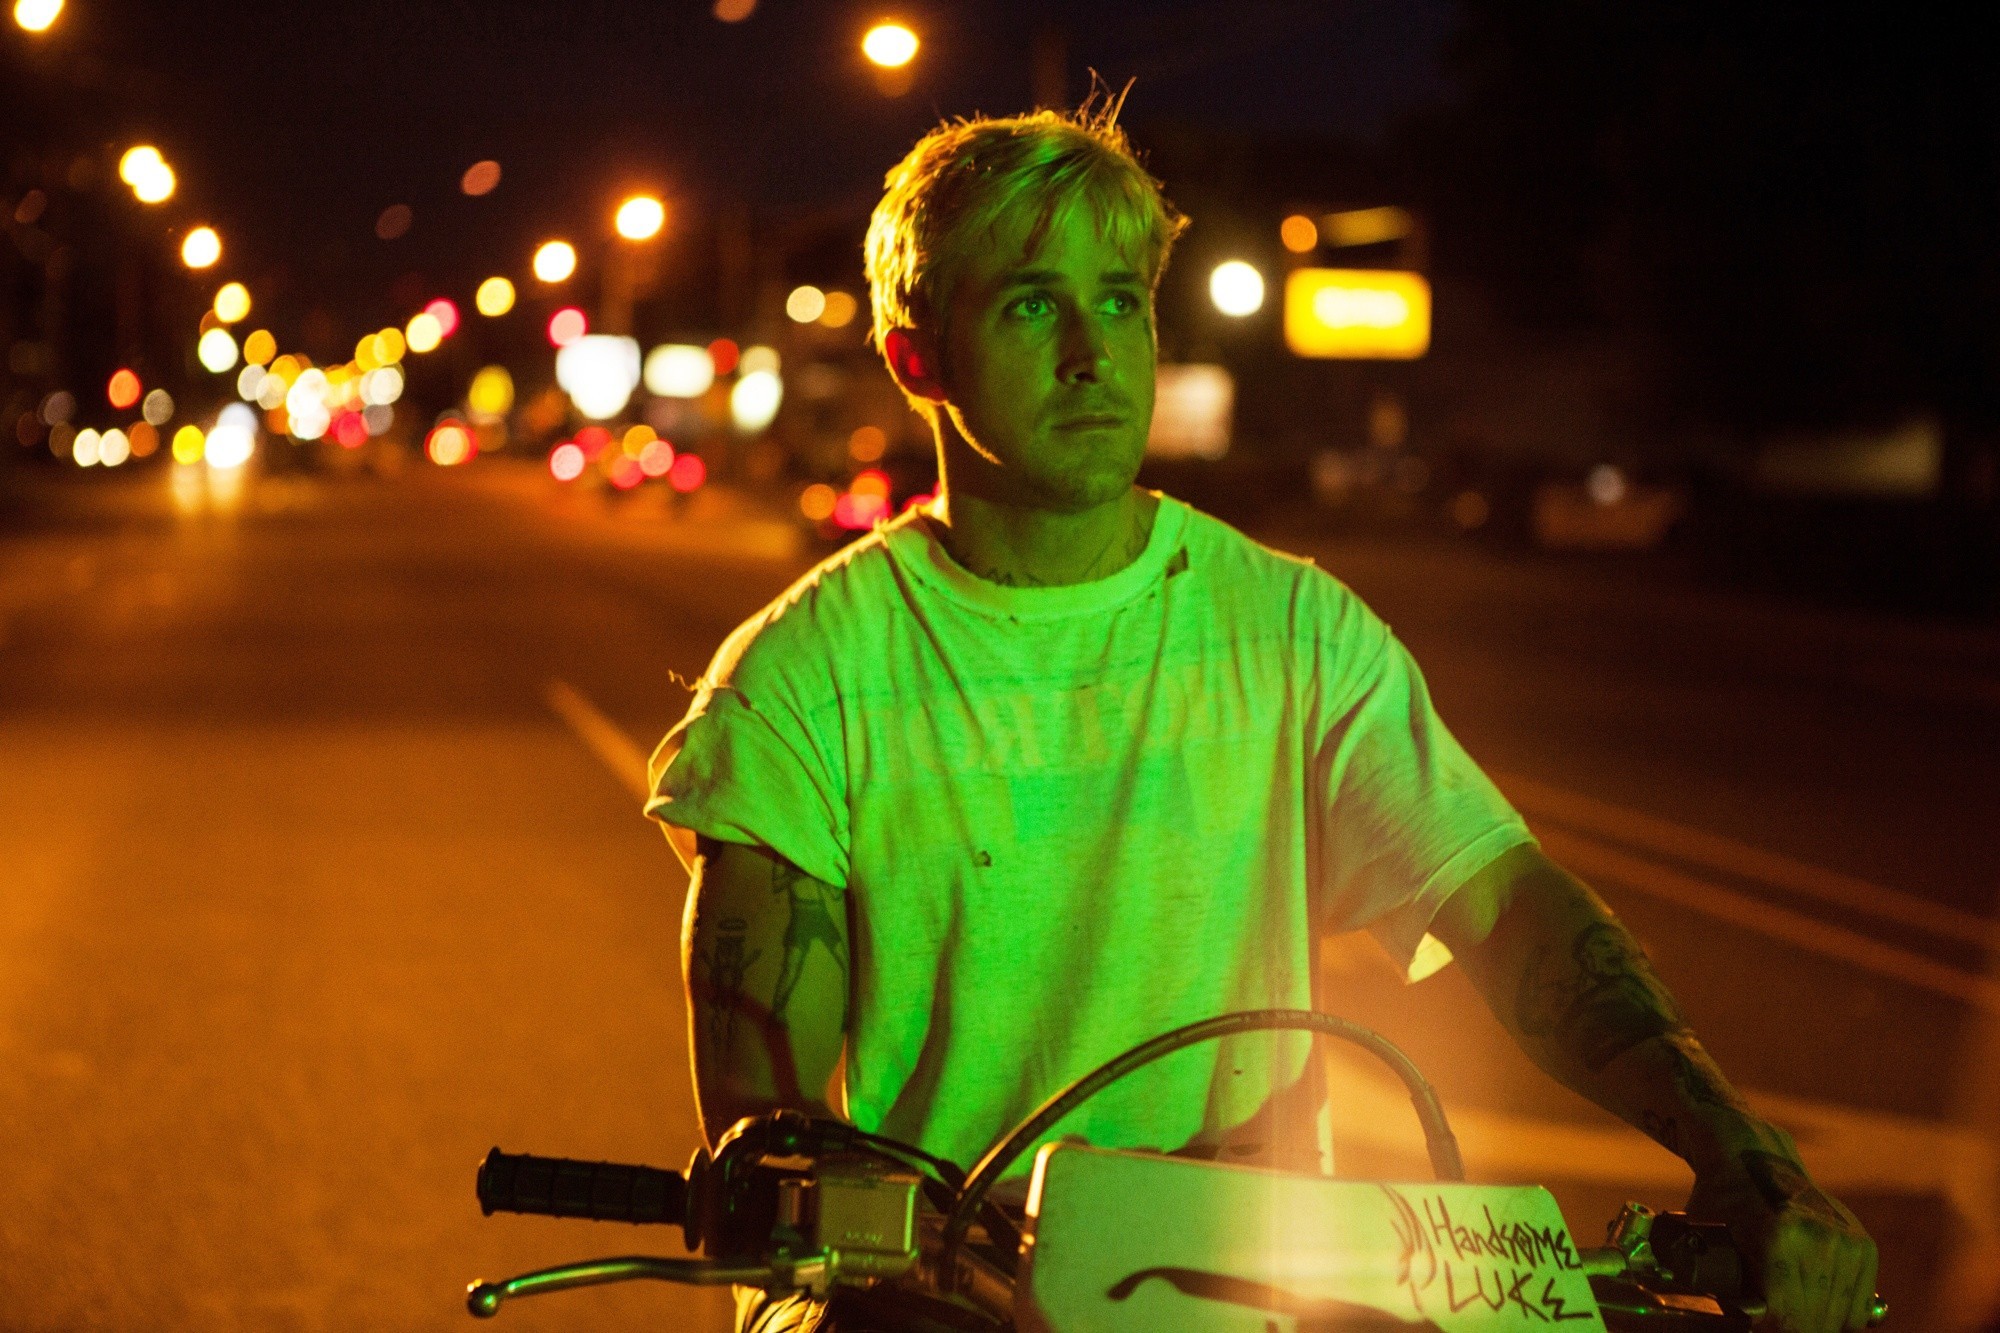 Ryan Gosling stars as Luke in Focus Features' The Place Beyond the Pines (2013). Photo credit by Atsushi Nishijima.